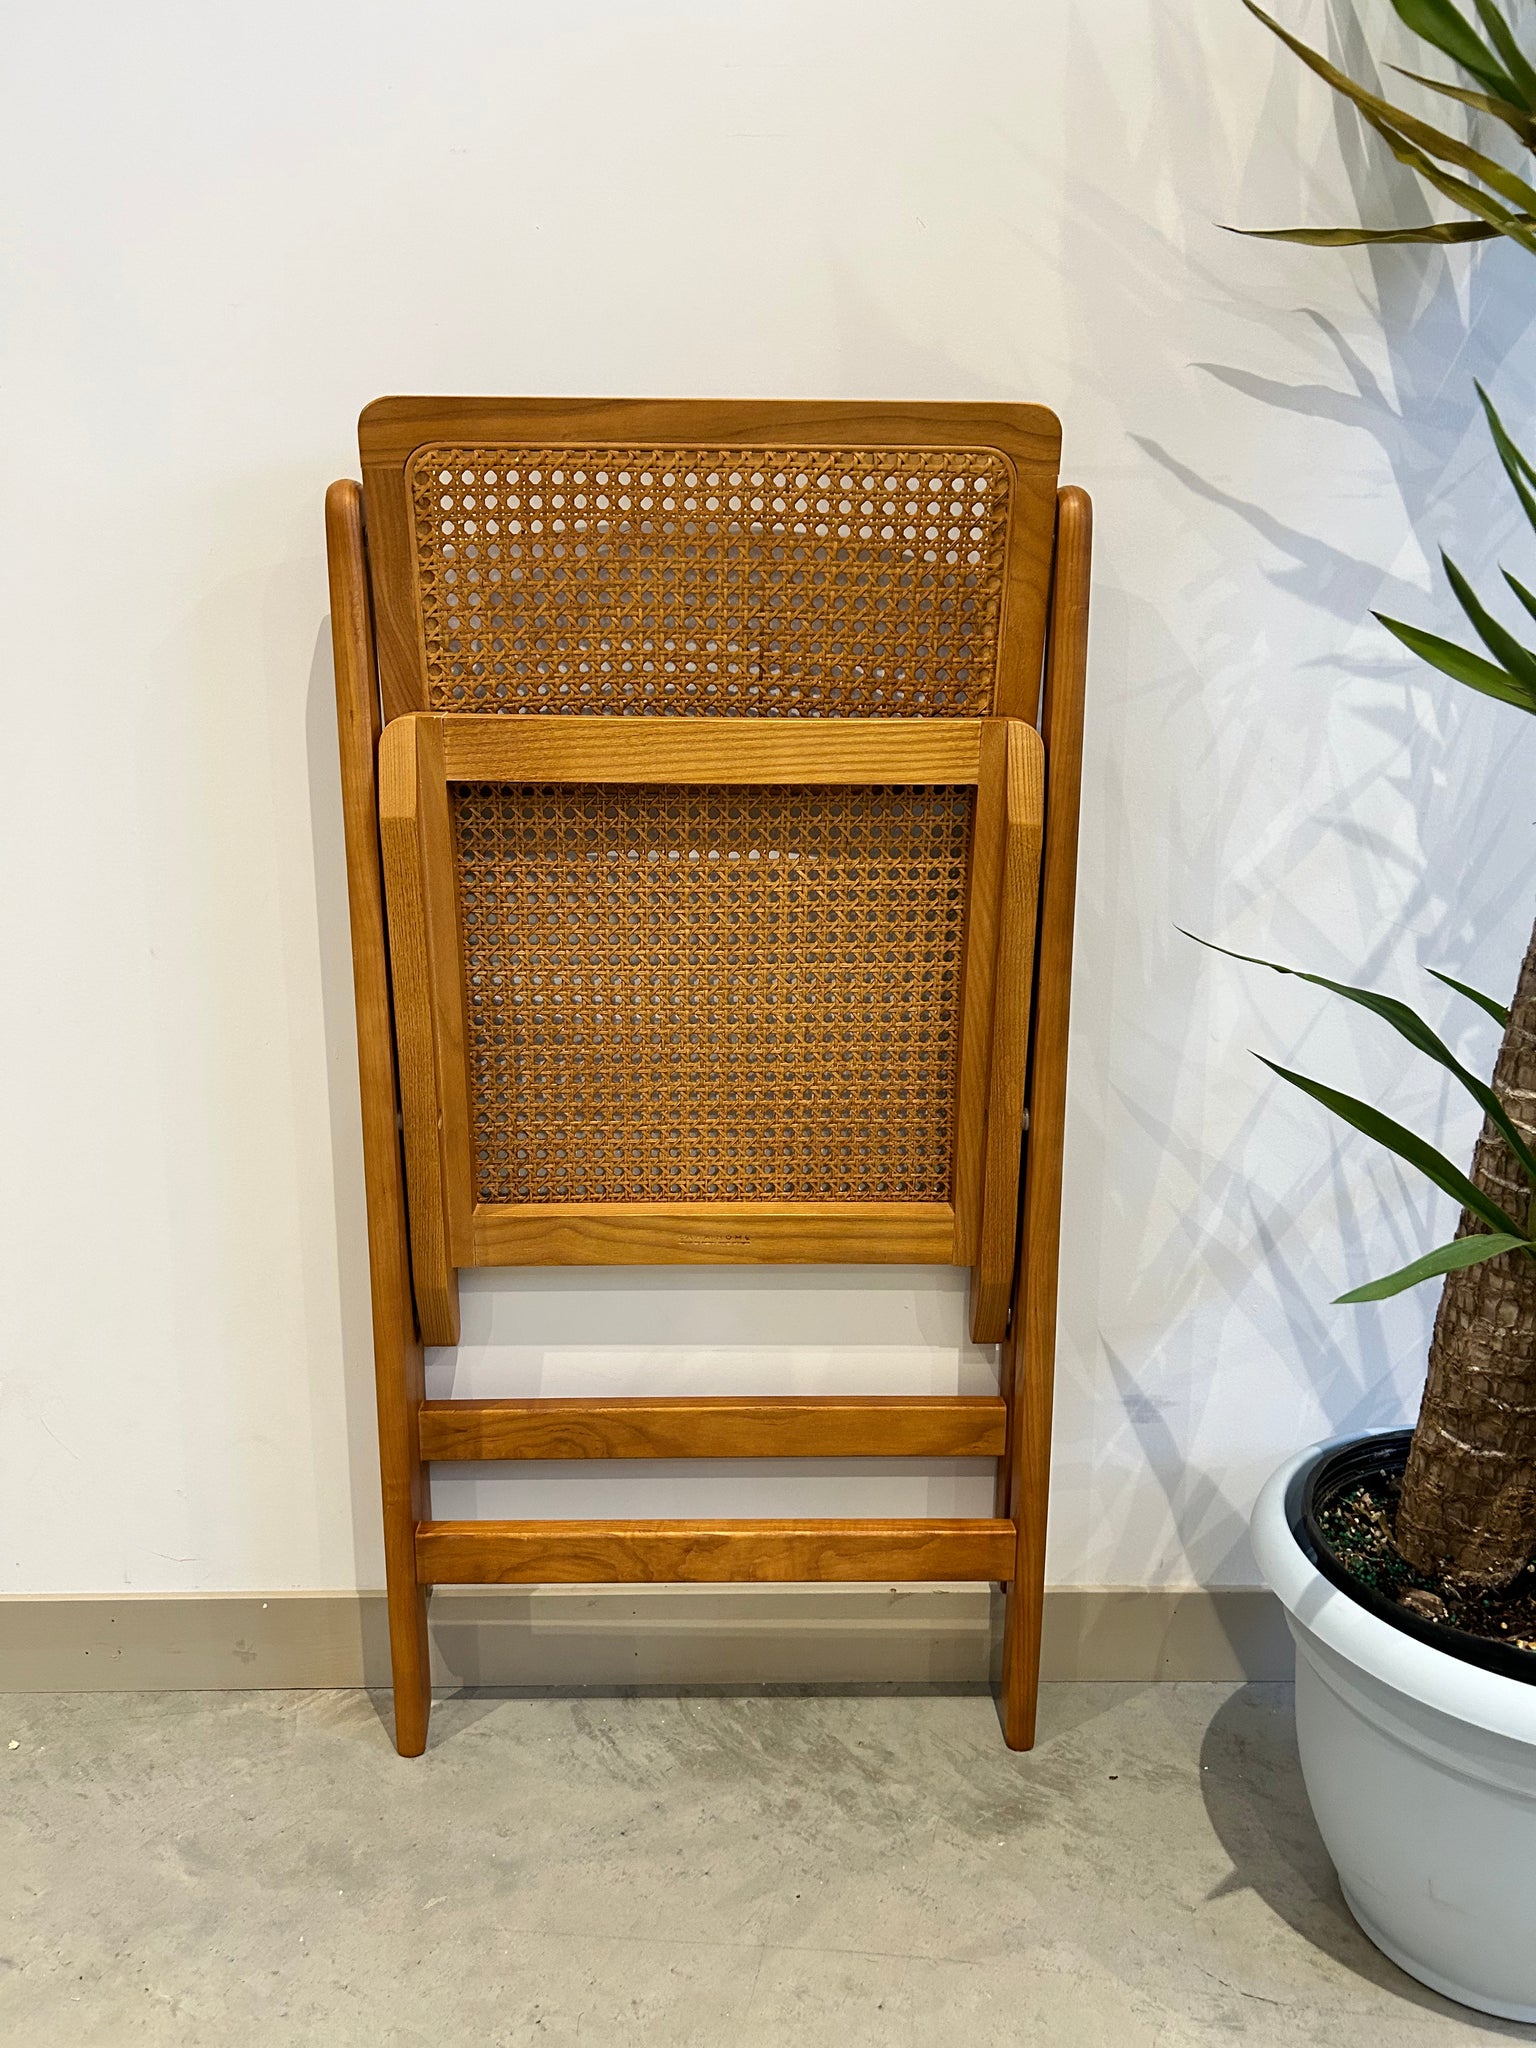 Vintage style wood & rattan folding chairs